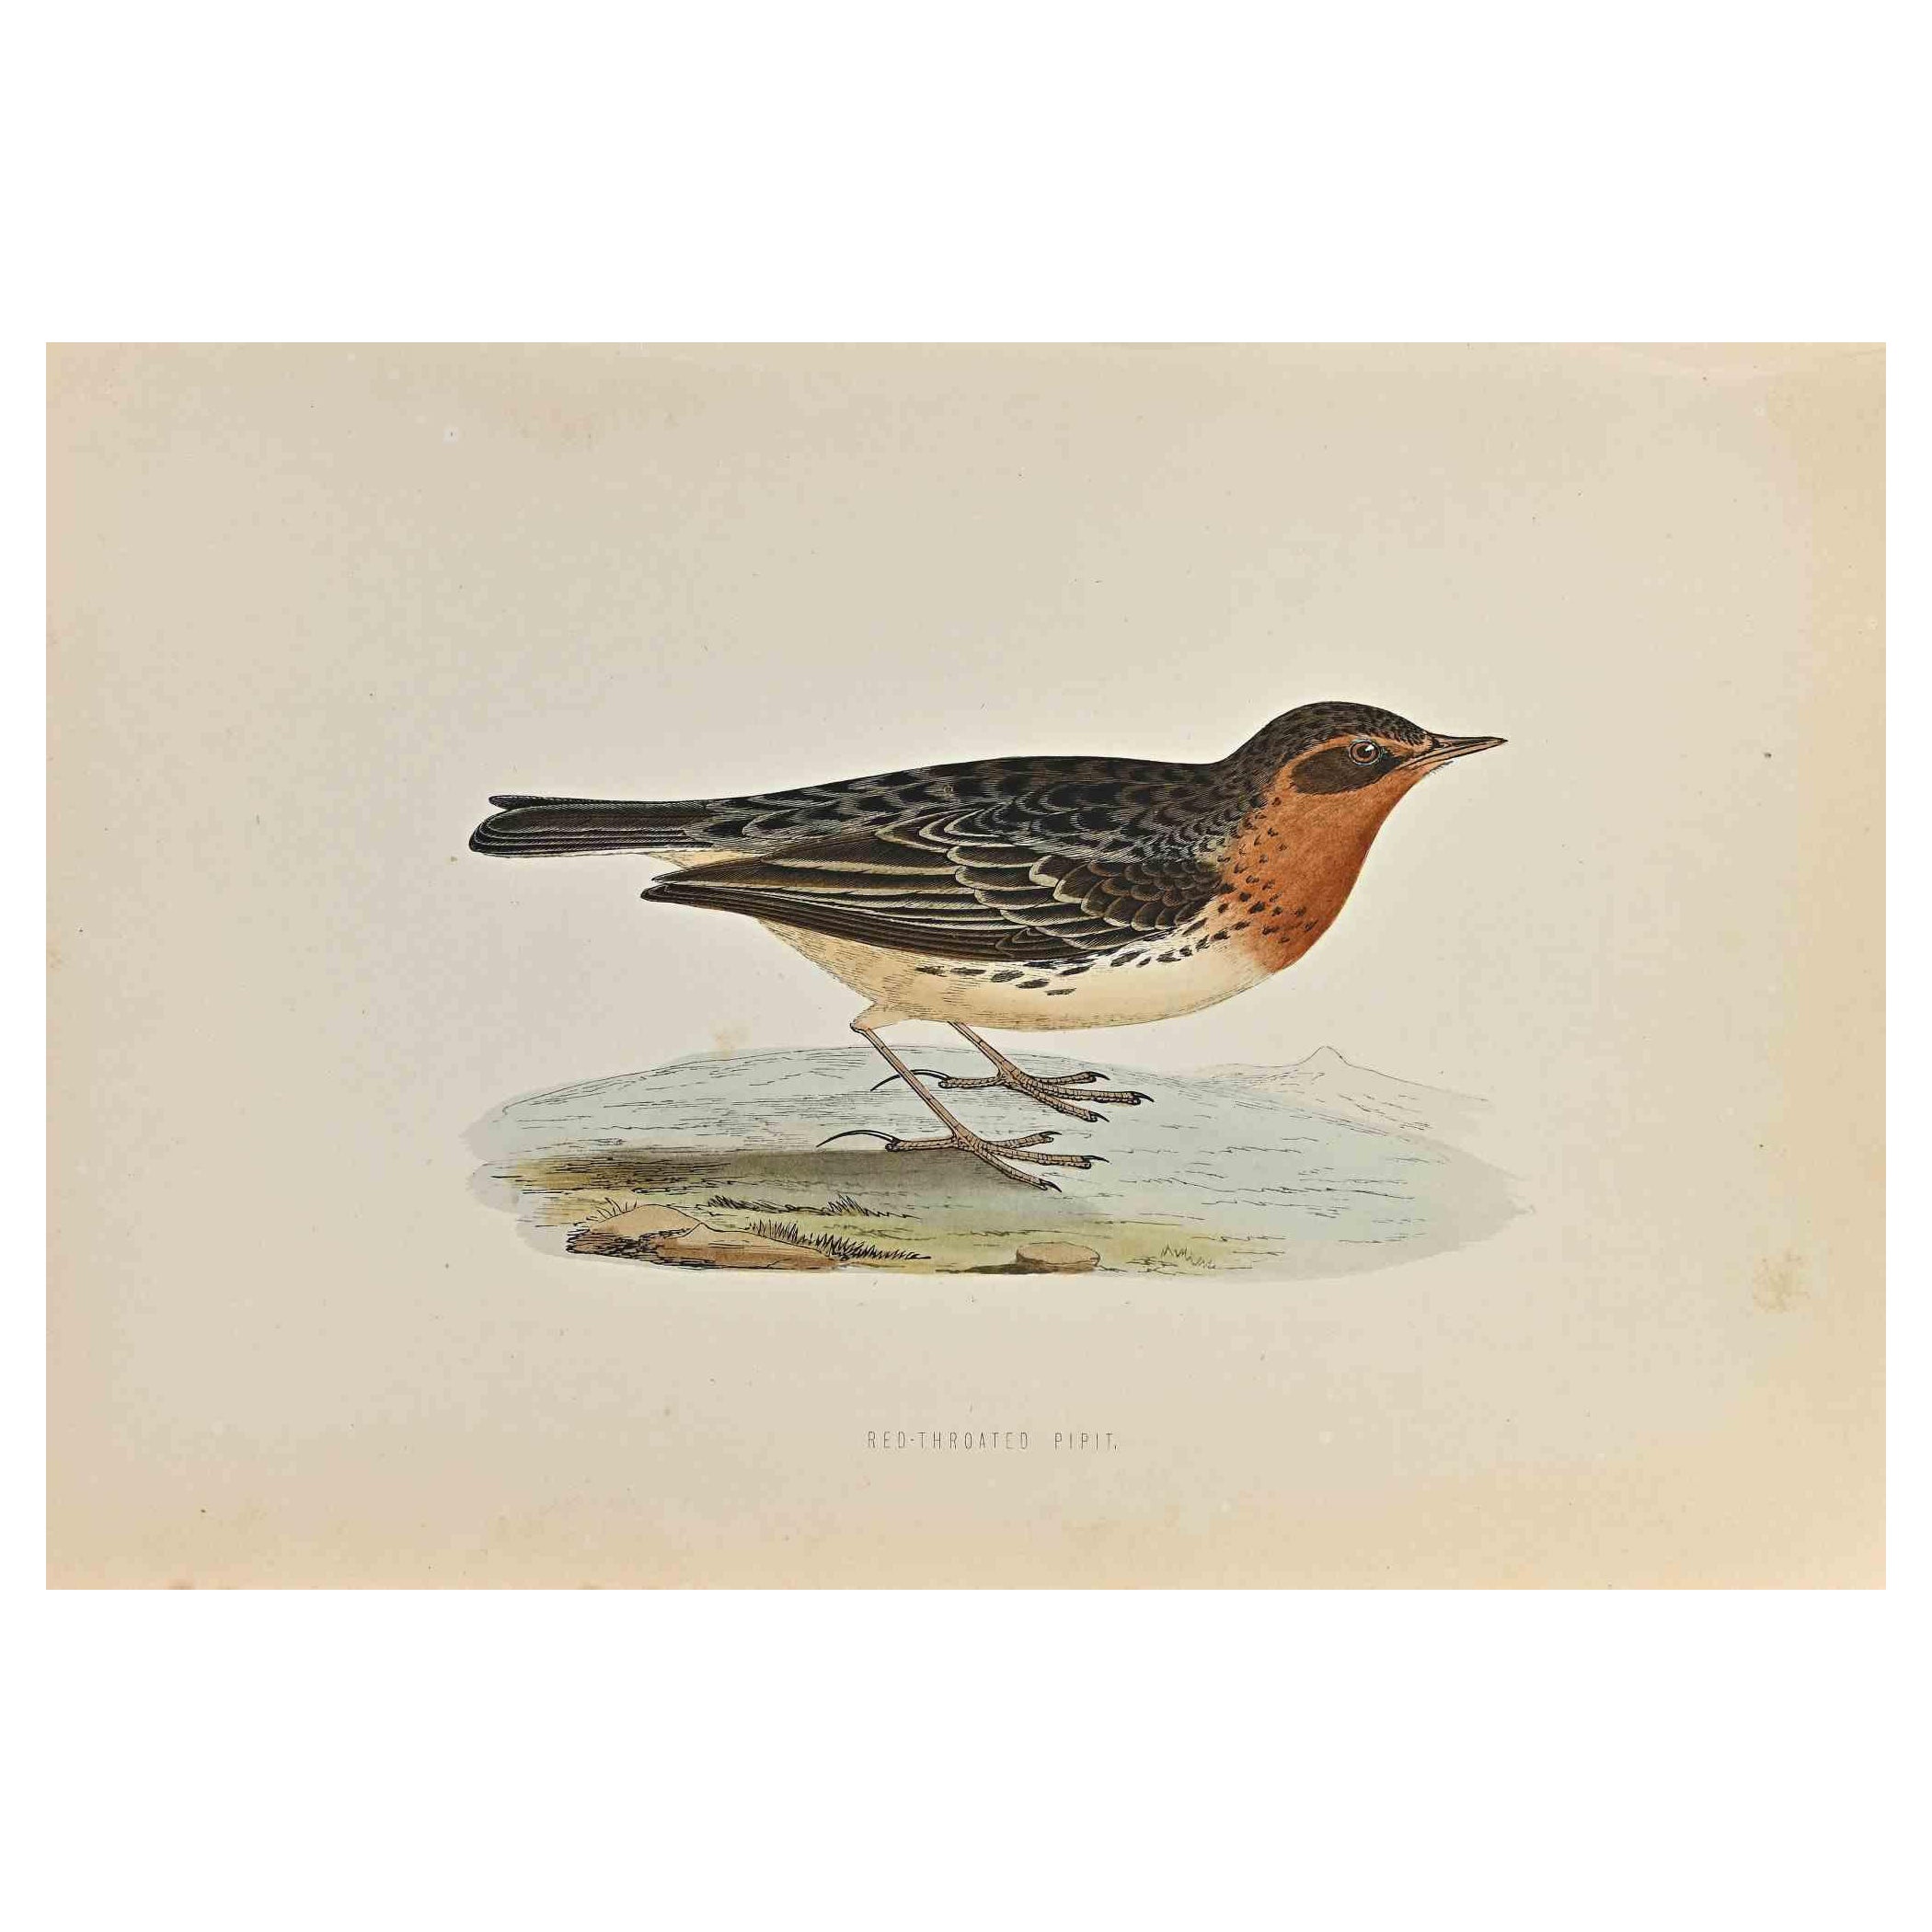 Red-Throated Pipit is a modern artwork realized in 1870 by the British artist Alexander Francis Lydon (1836-1917) . 

Woodcut print, hand colored, published by London, Bell & Sons, 1870.  Name of the bird printed in plate. This work is part of a